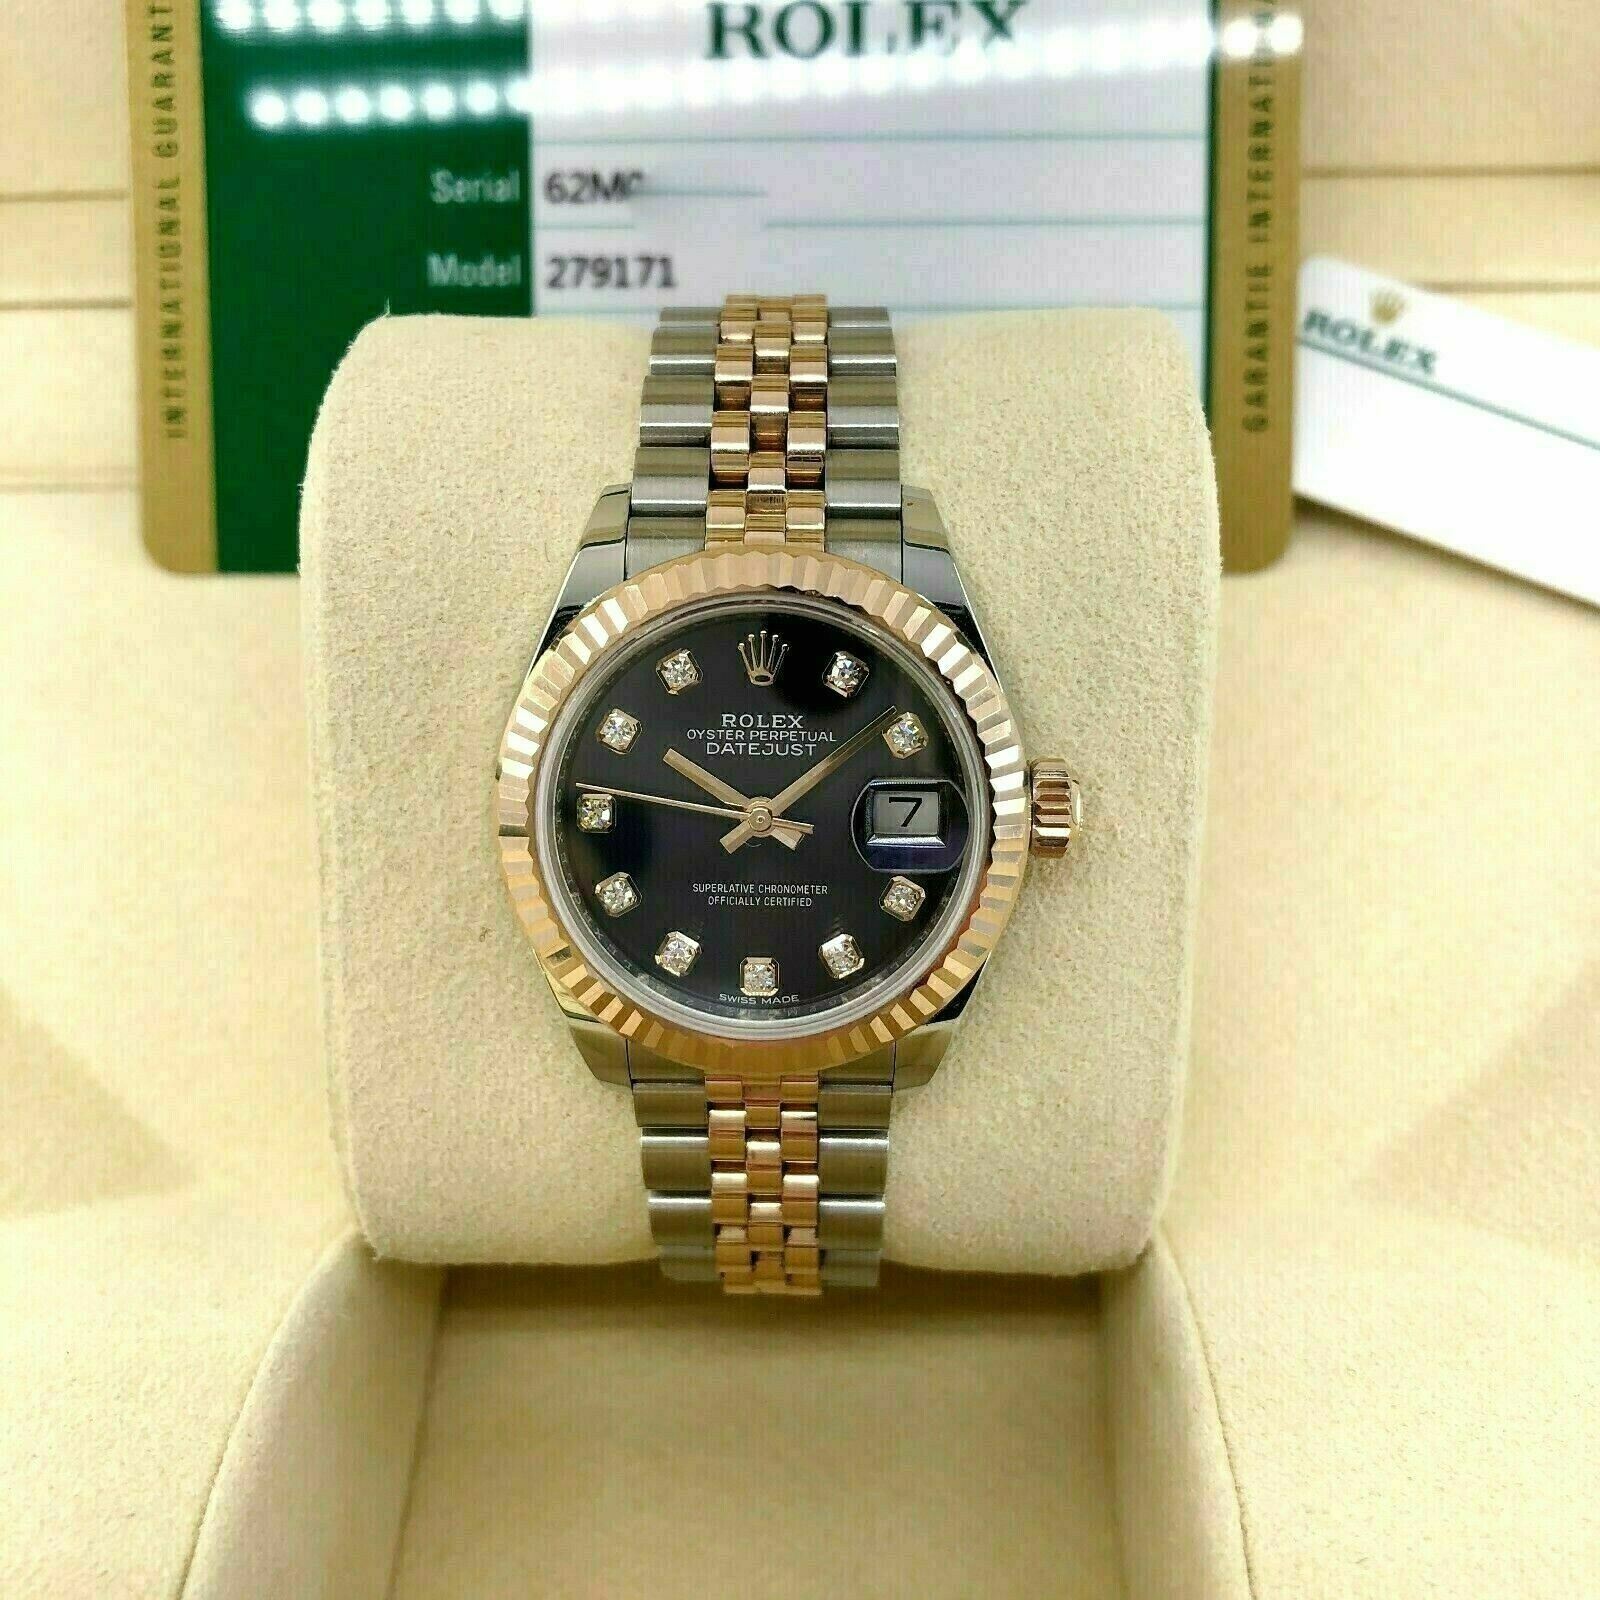 Rolex 28MM Lady Datejust 18K Rose Gold Steel Watch Ref # 279171 Factory Dial